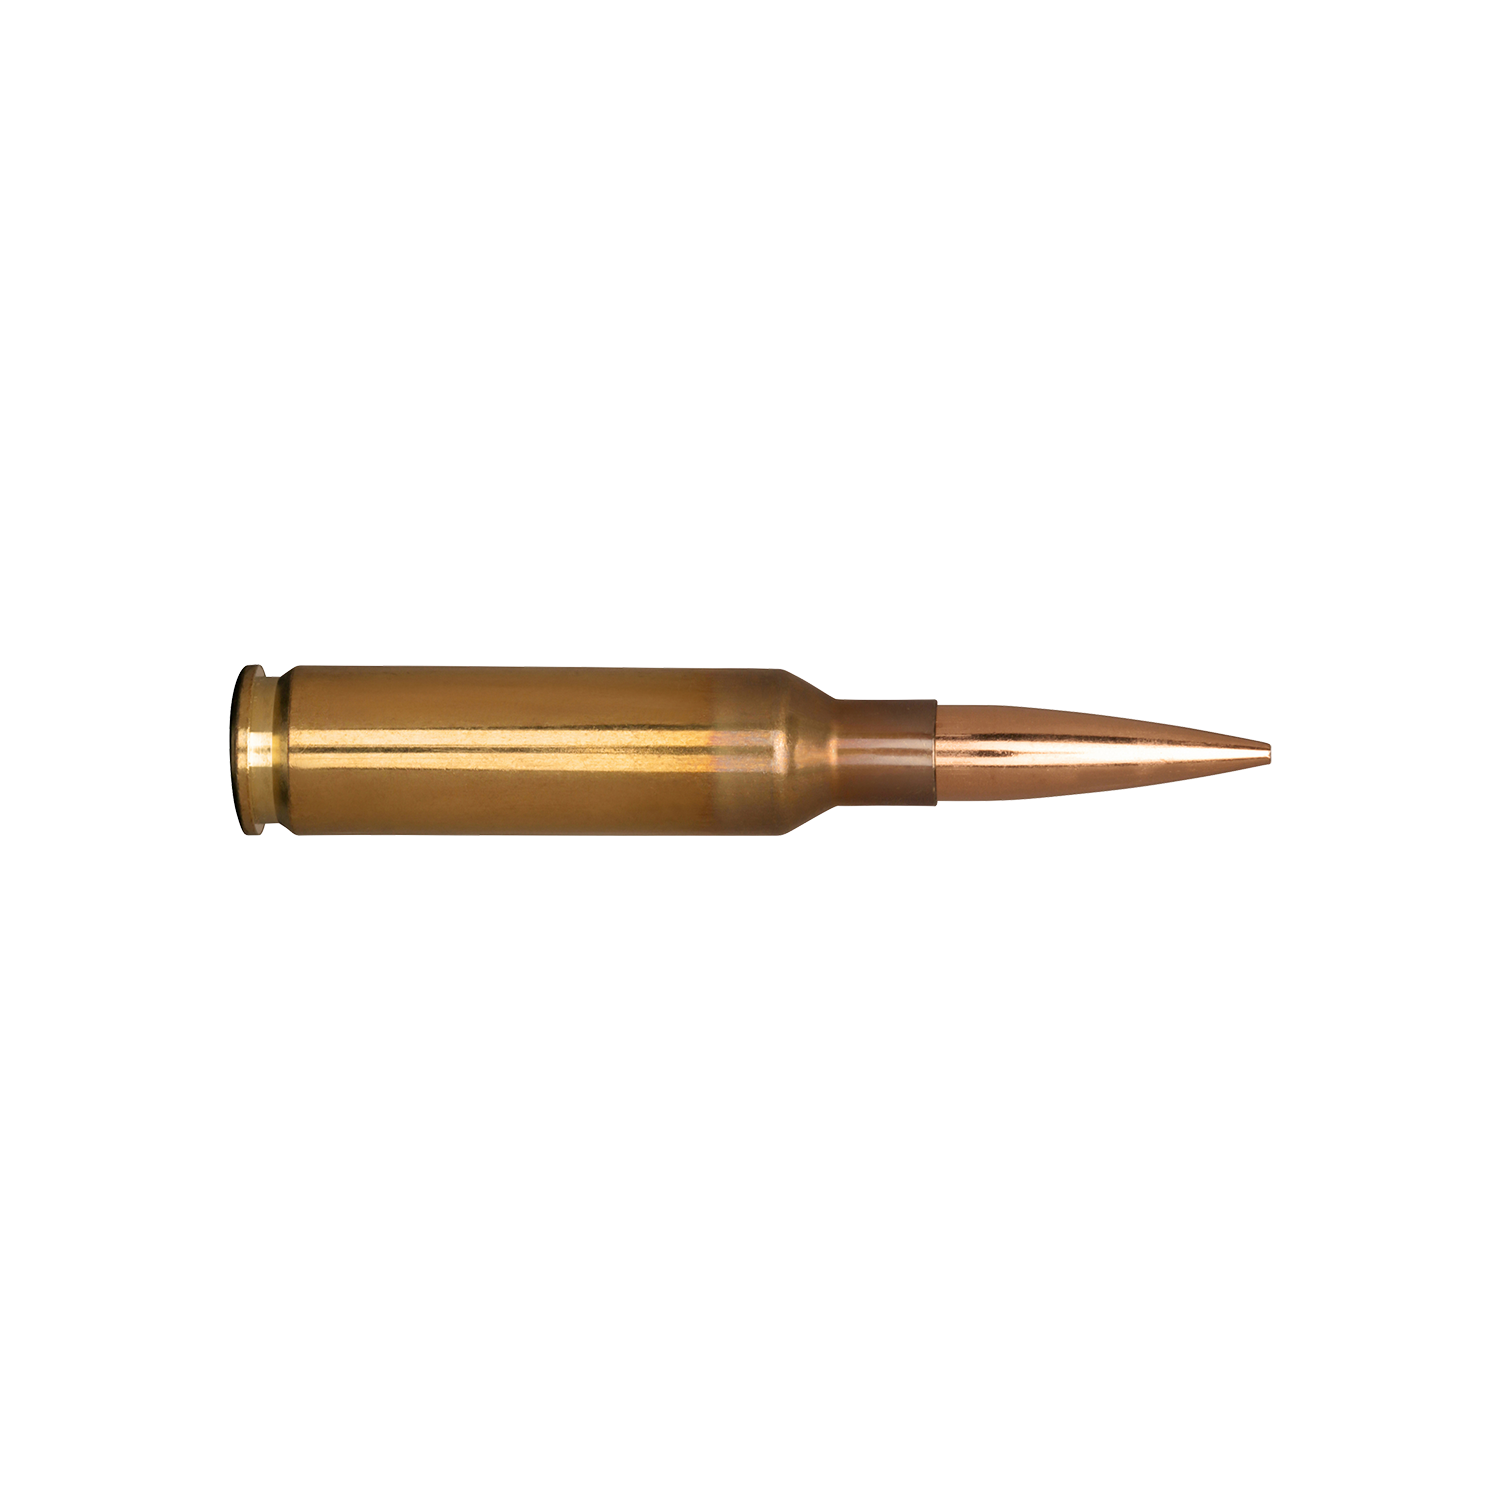 image of 6.5 Creedmoor 156gr Extreme Outer Limits (EOL) Elite Hunter round